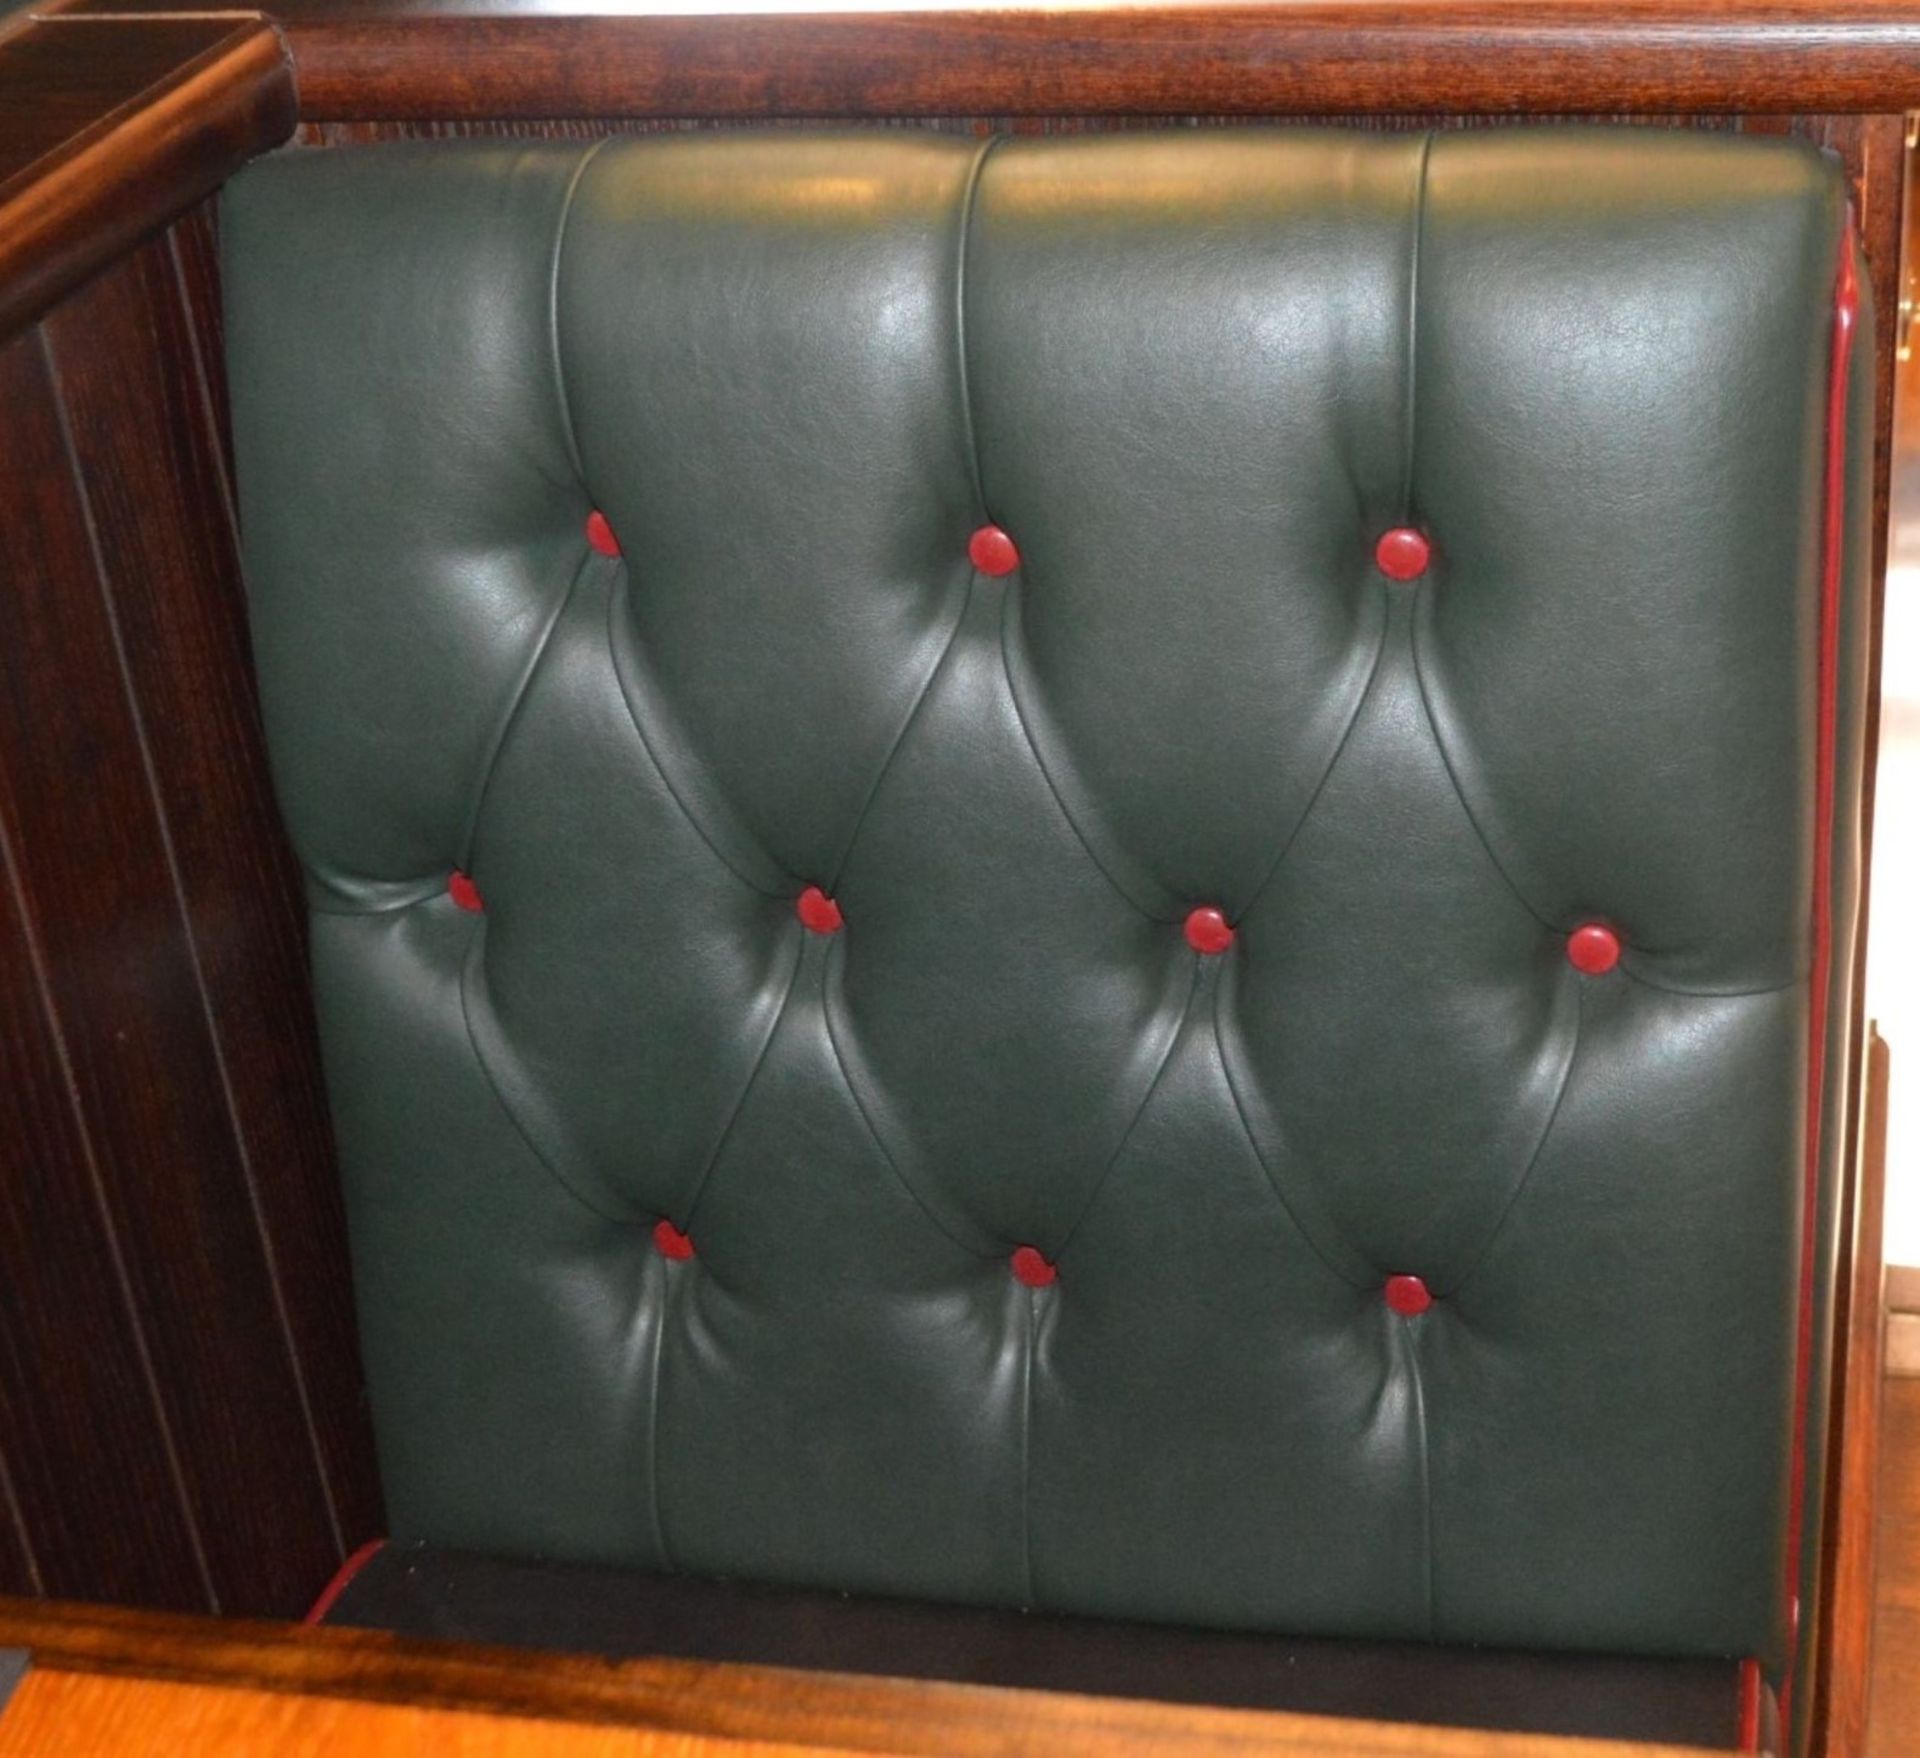 3 x Sections of Restaurant Single Seat Booth Seating With 2 x Tables - Image 4 of 9